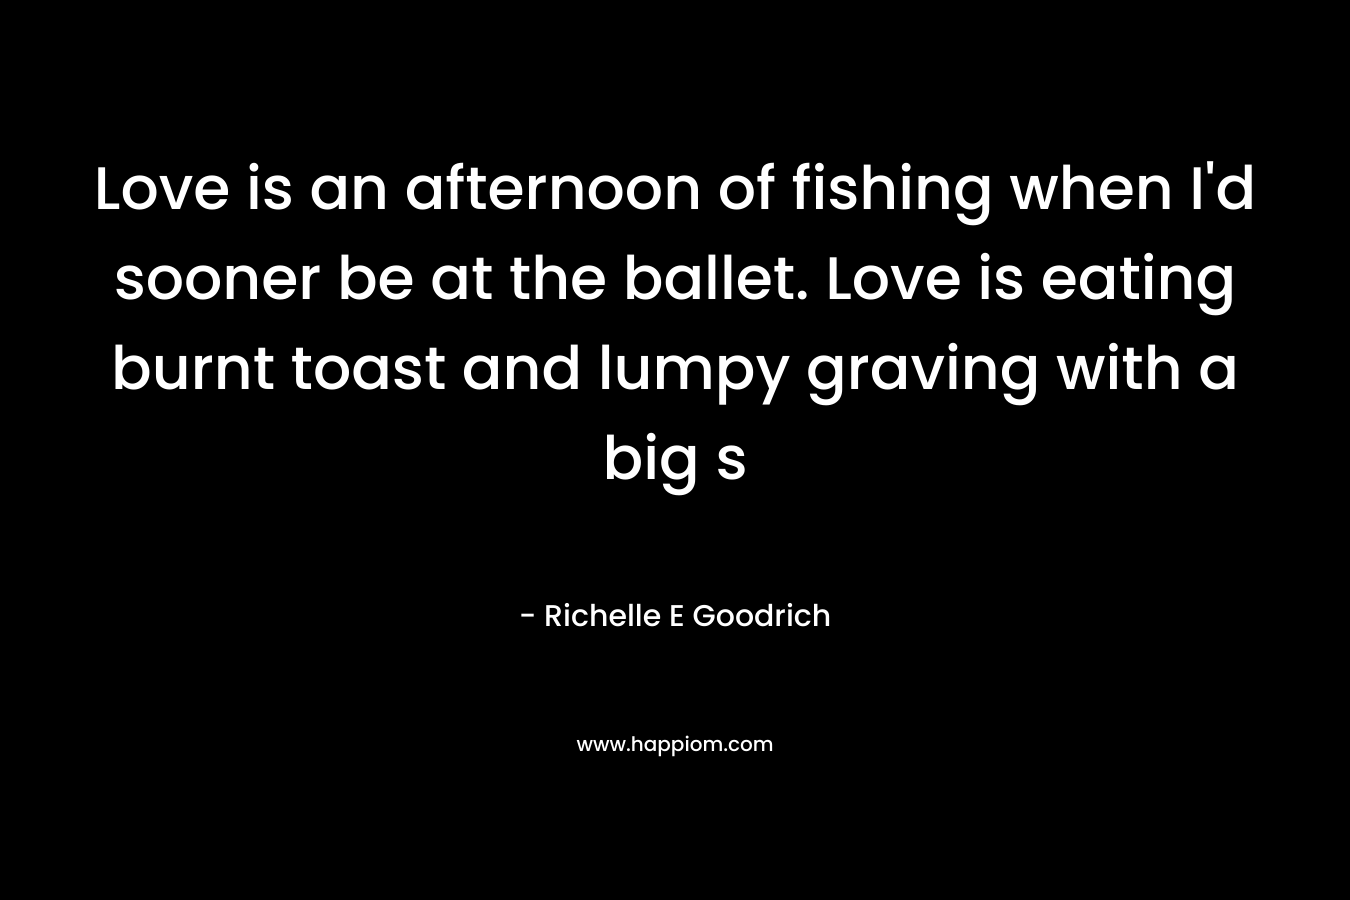 Love is an afternoon of fishing when I’d sooner be at the ballet. Love is eating burnt toast and lumpy graving with a big s – Richelle E Goodrich